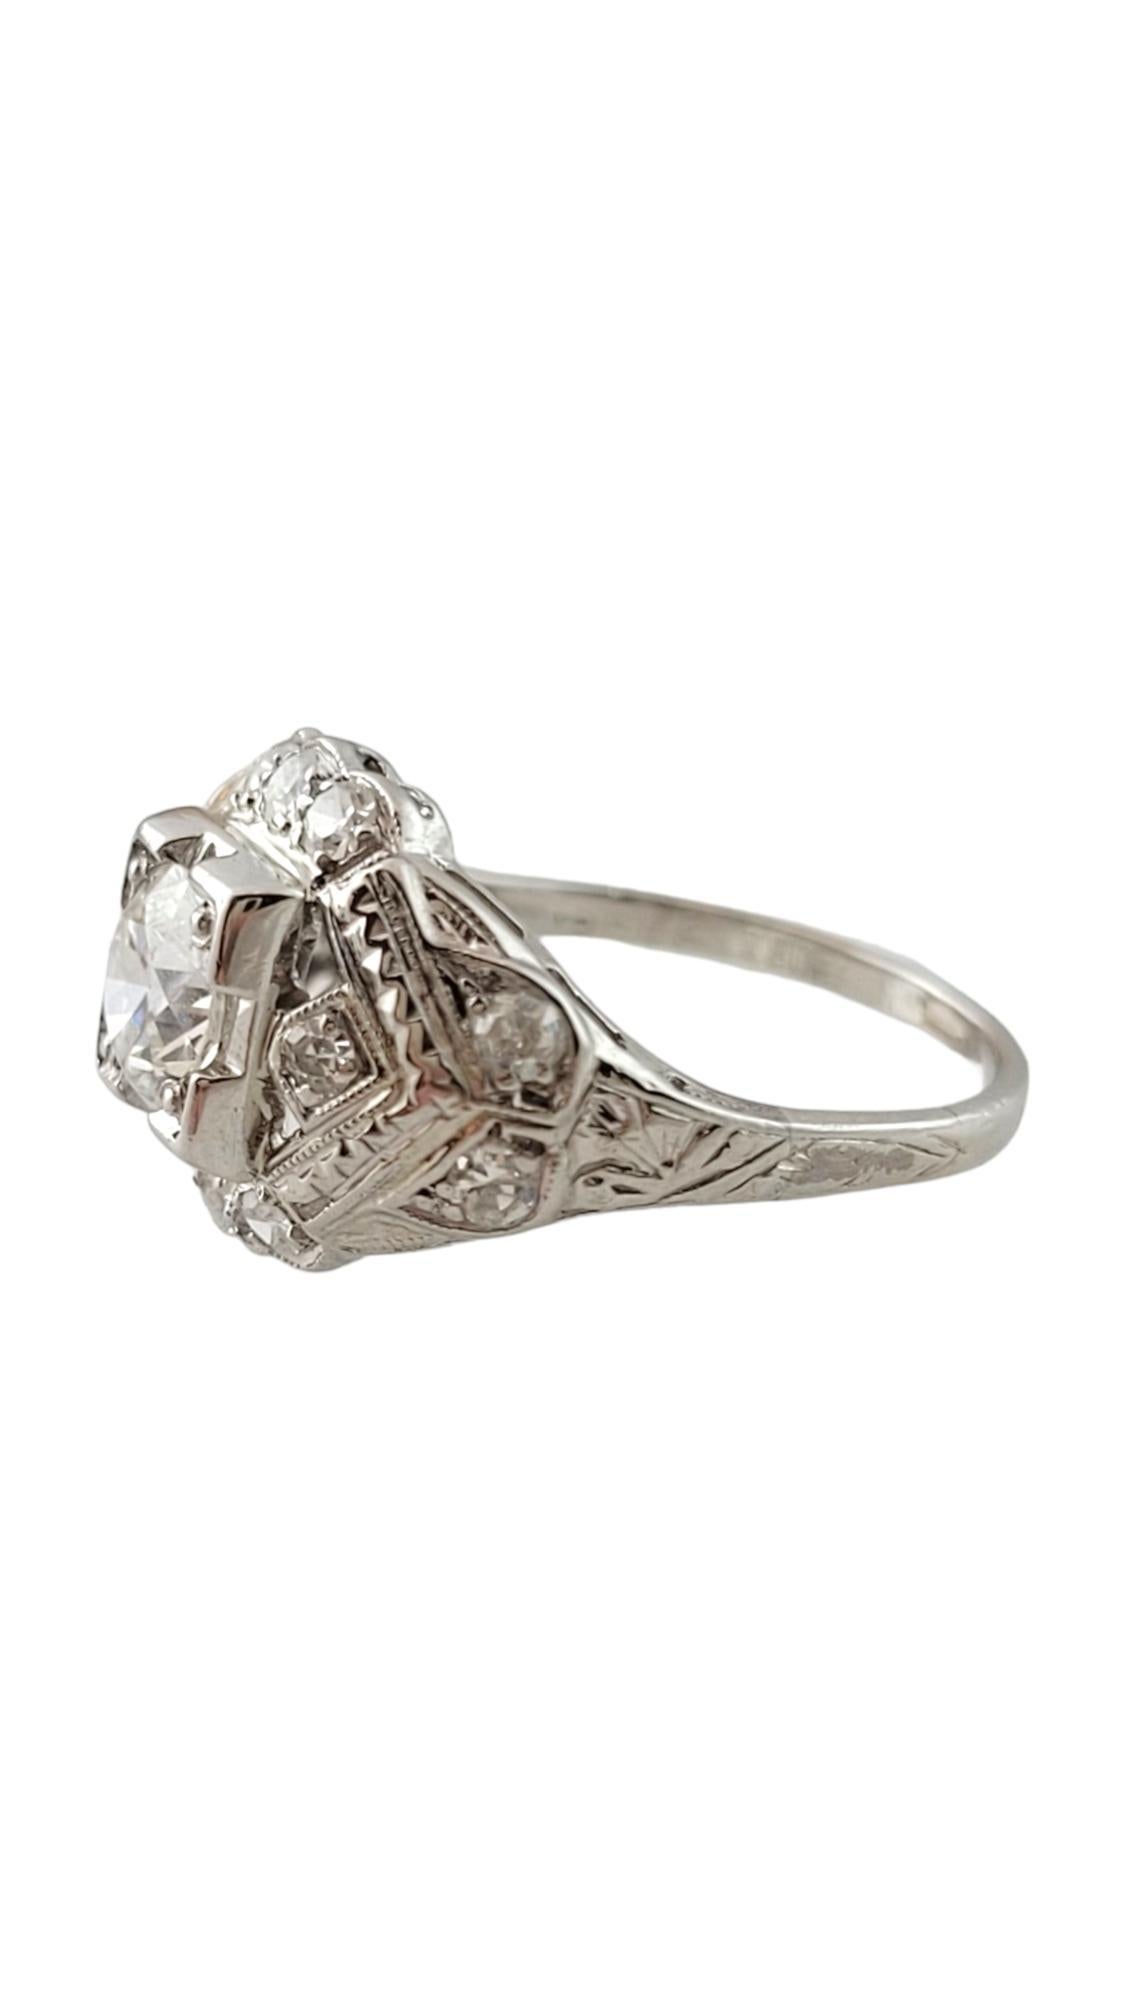 Vintage Platinum and Diamond Engagement Ring Size 4.5-

This sparkling ring features one round brilliant cut diamond (.50 ct.) surrounded by 12 single cut diamonds (.02 ct. each) and set in lovely platinum filigree.
Shank measures 1 mm.

Approximate